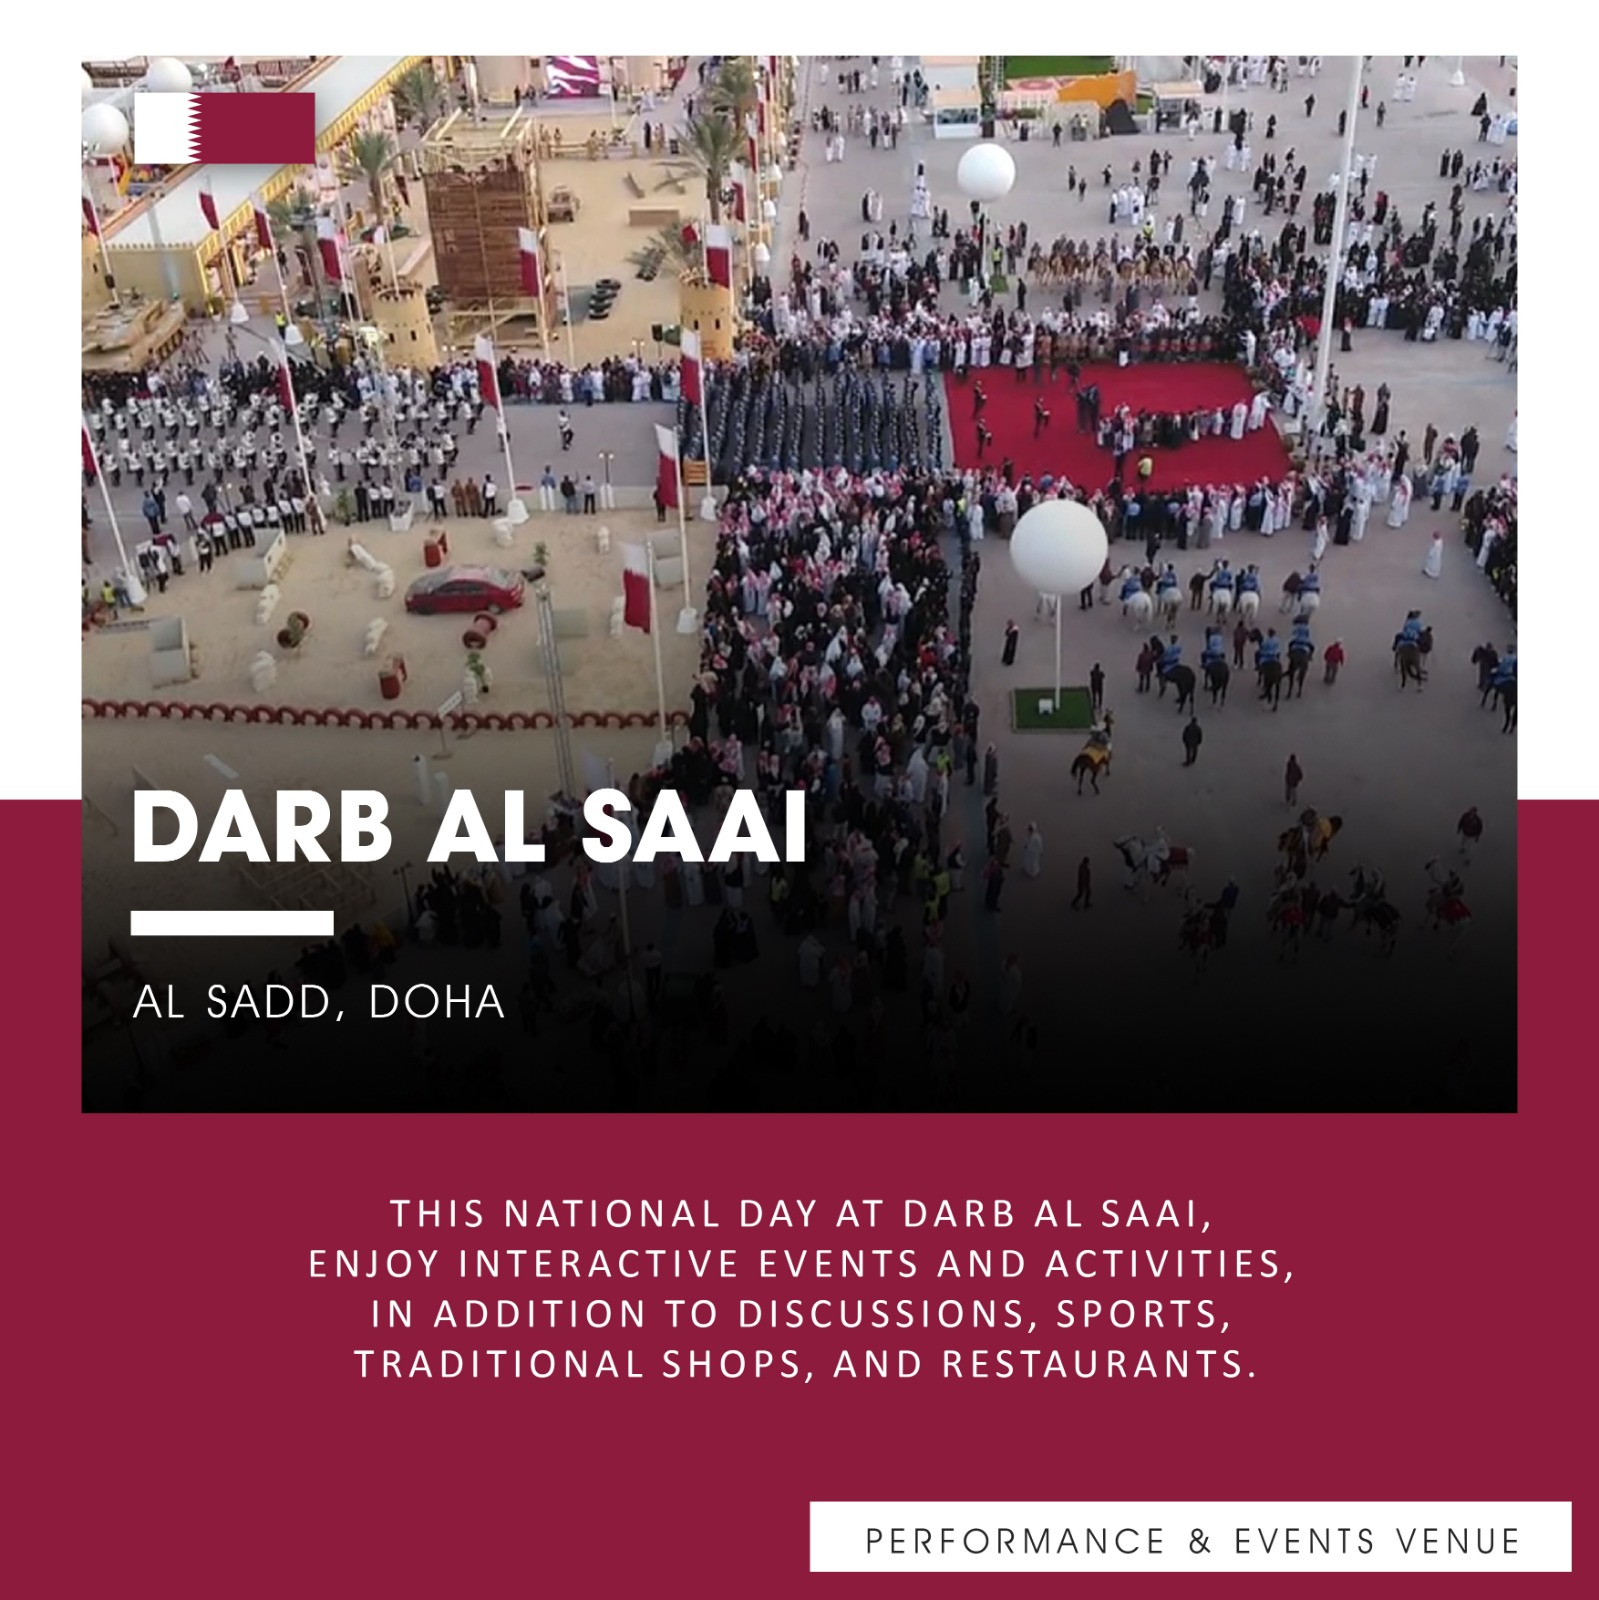 Qatar national day -events & performance